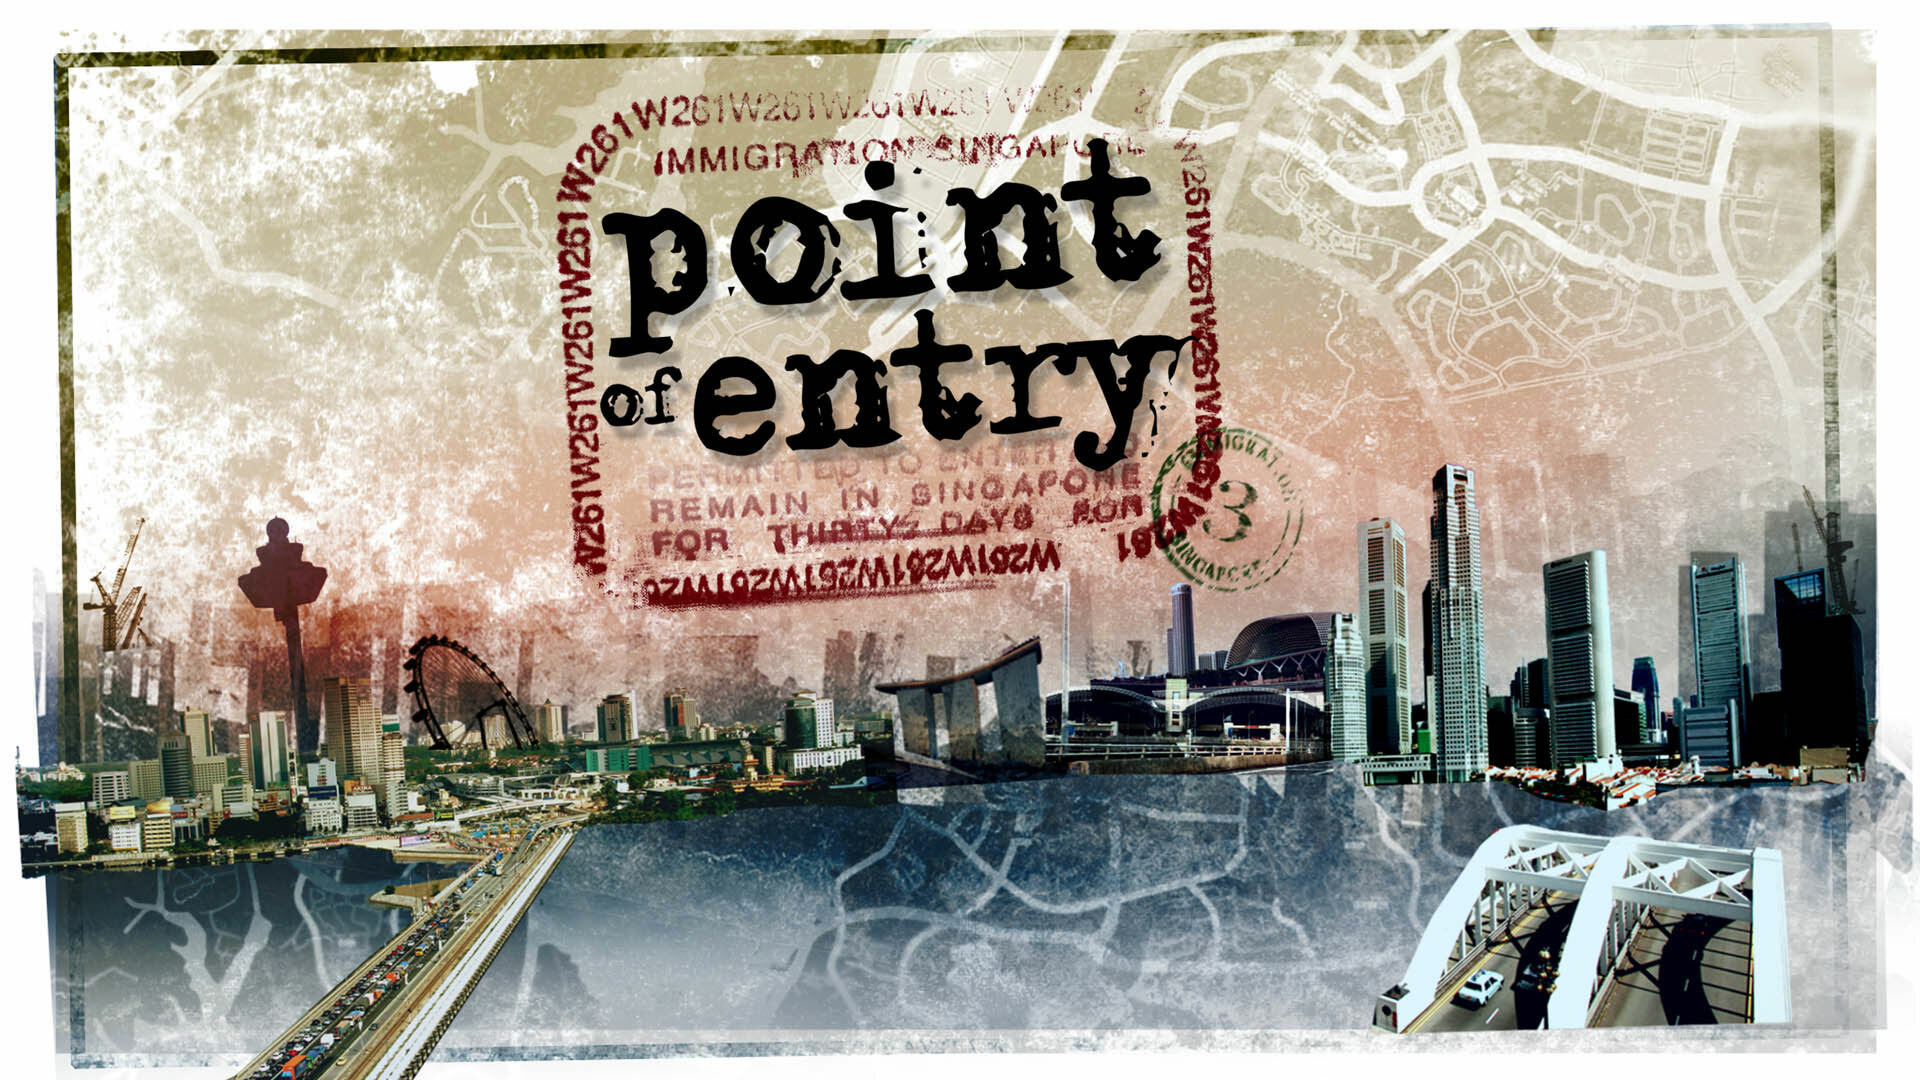 Show Point of Entry